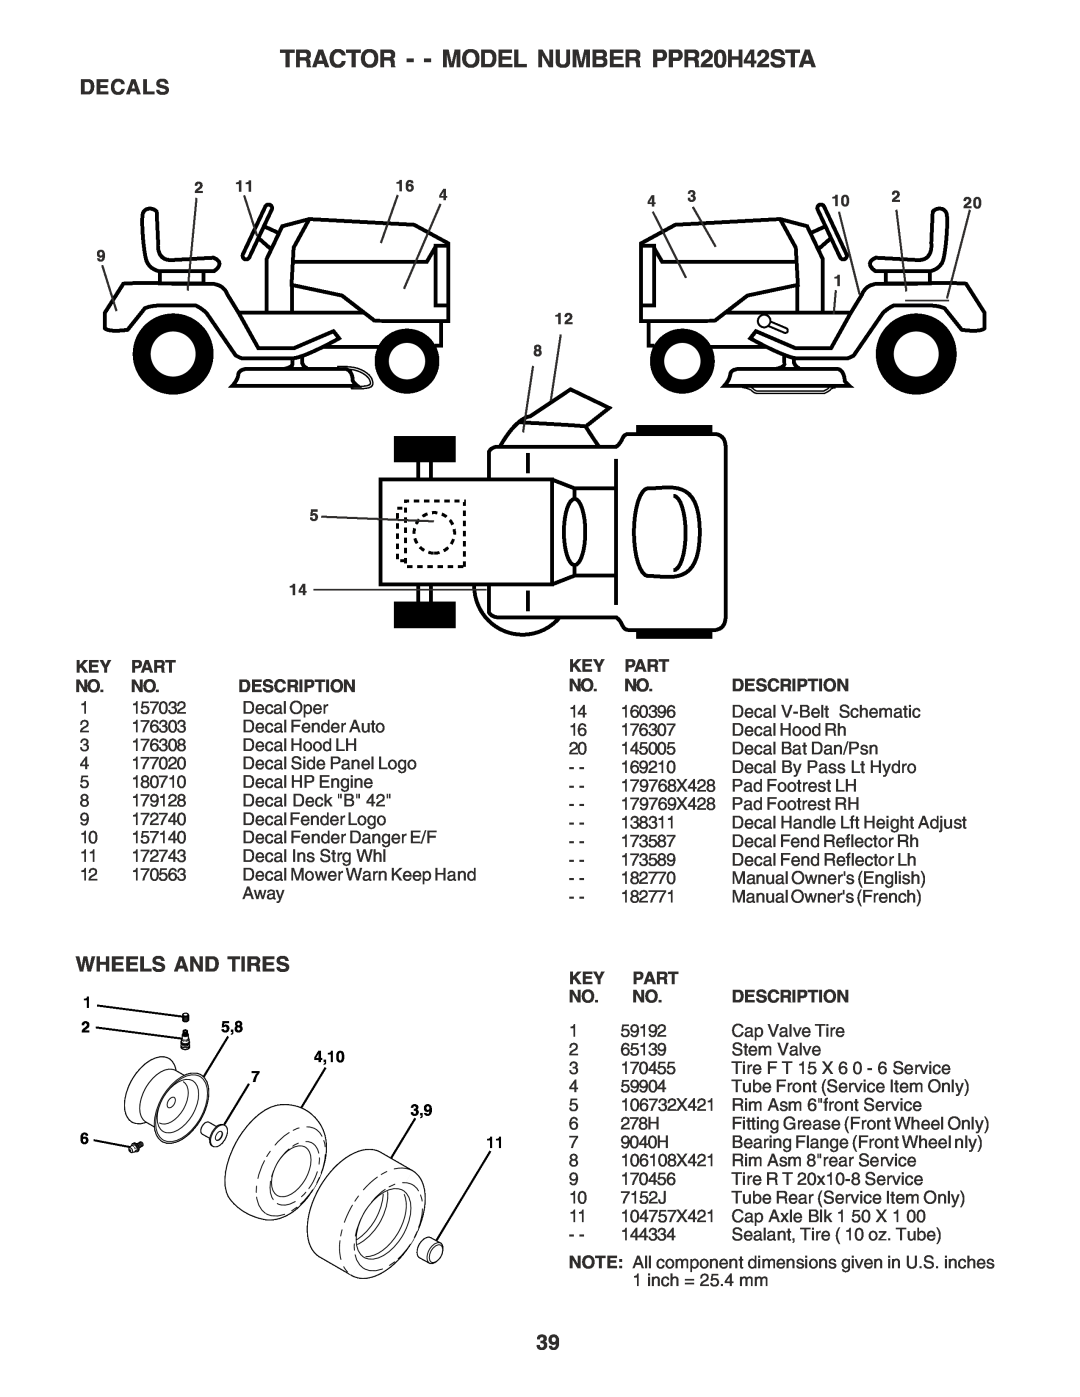 Poulan owner manual Decals, Wheels And Tires, TRACTOR - - MODEL NUMBER PPR20H42STA 